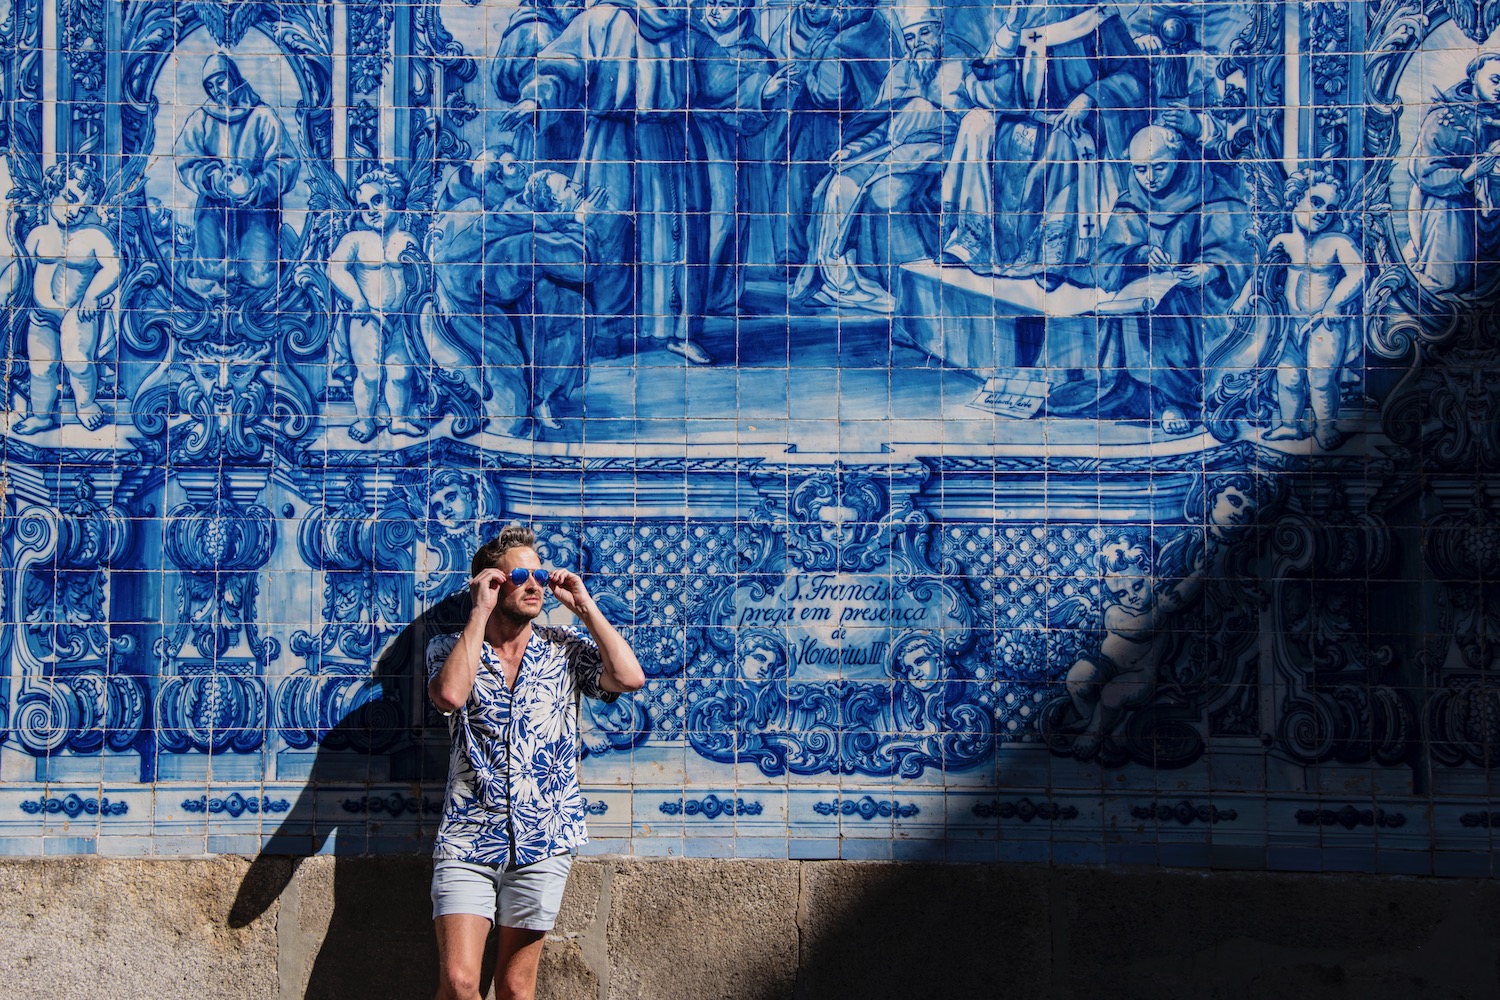 30 Pictures That Will Make You Want to Visit Portugal